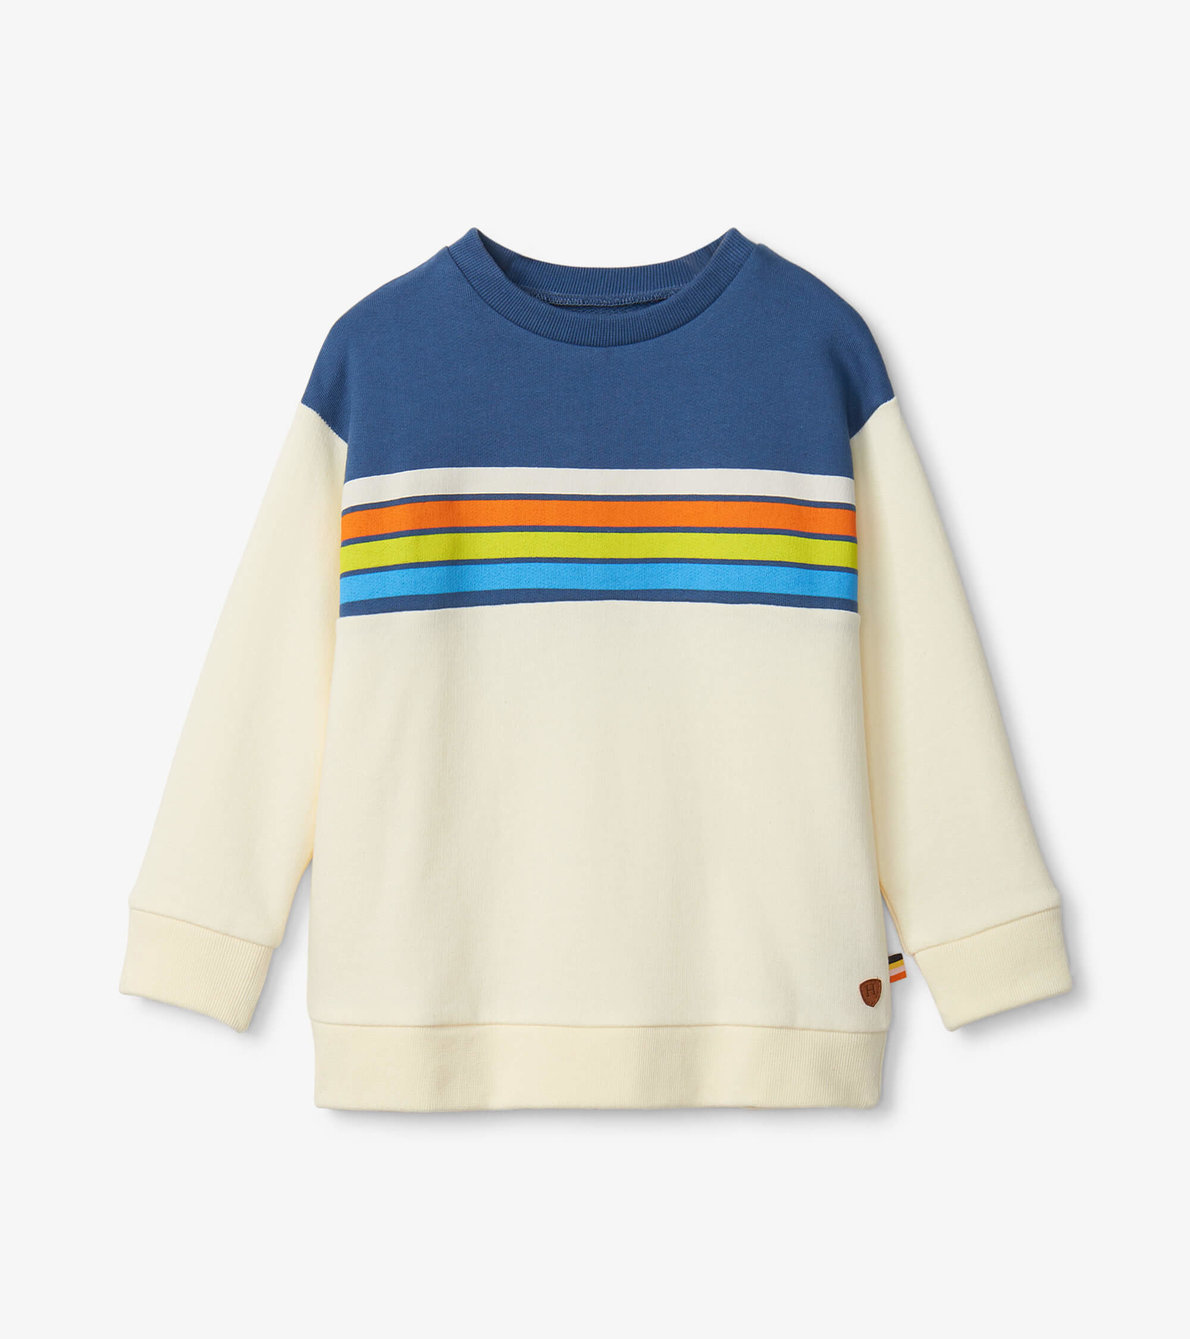 View larger image of Dino Stripes Pullover Sweatshirt